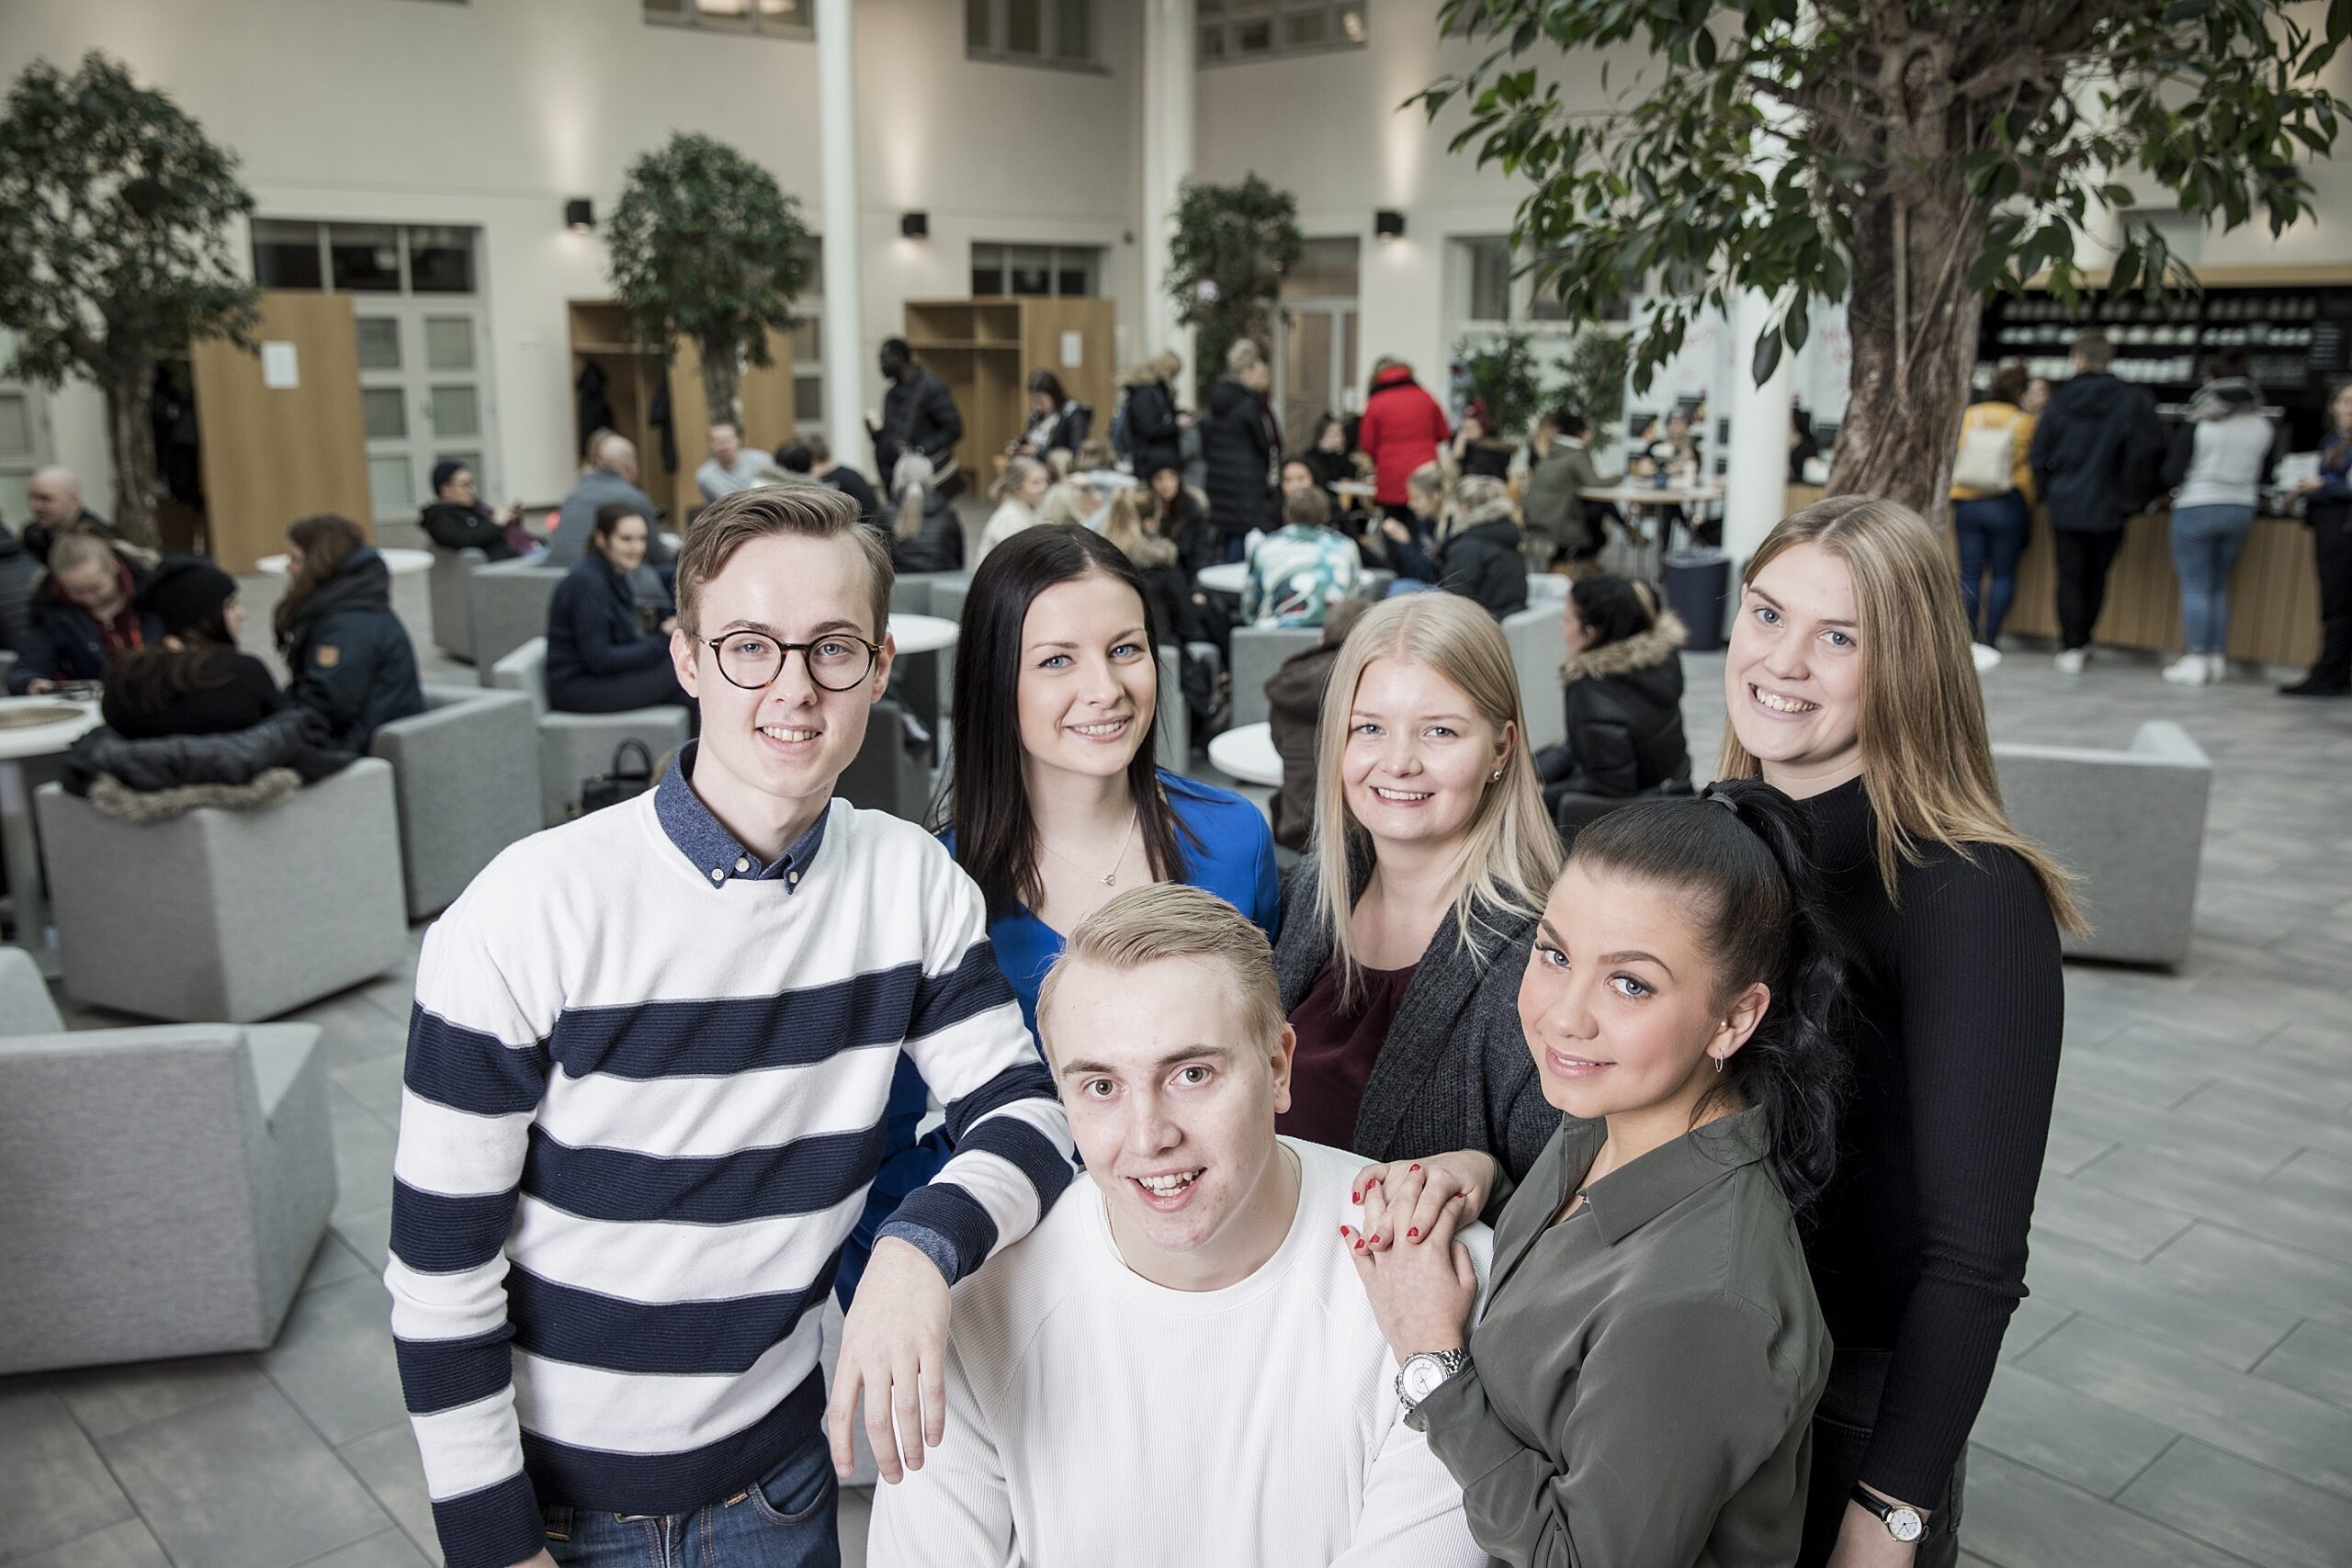 VAMK Career Rekry event brings students and companies together